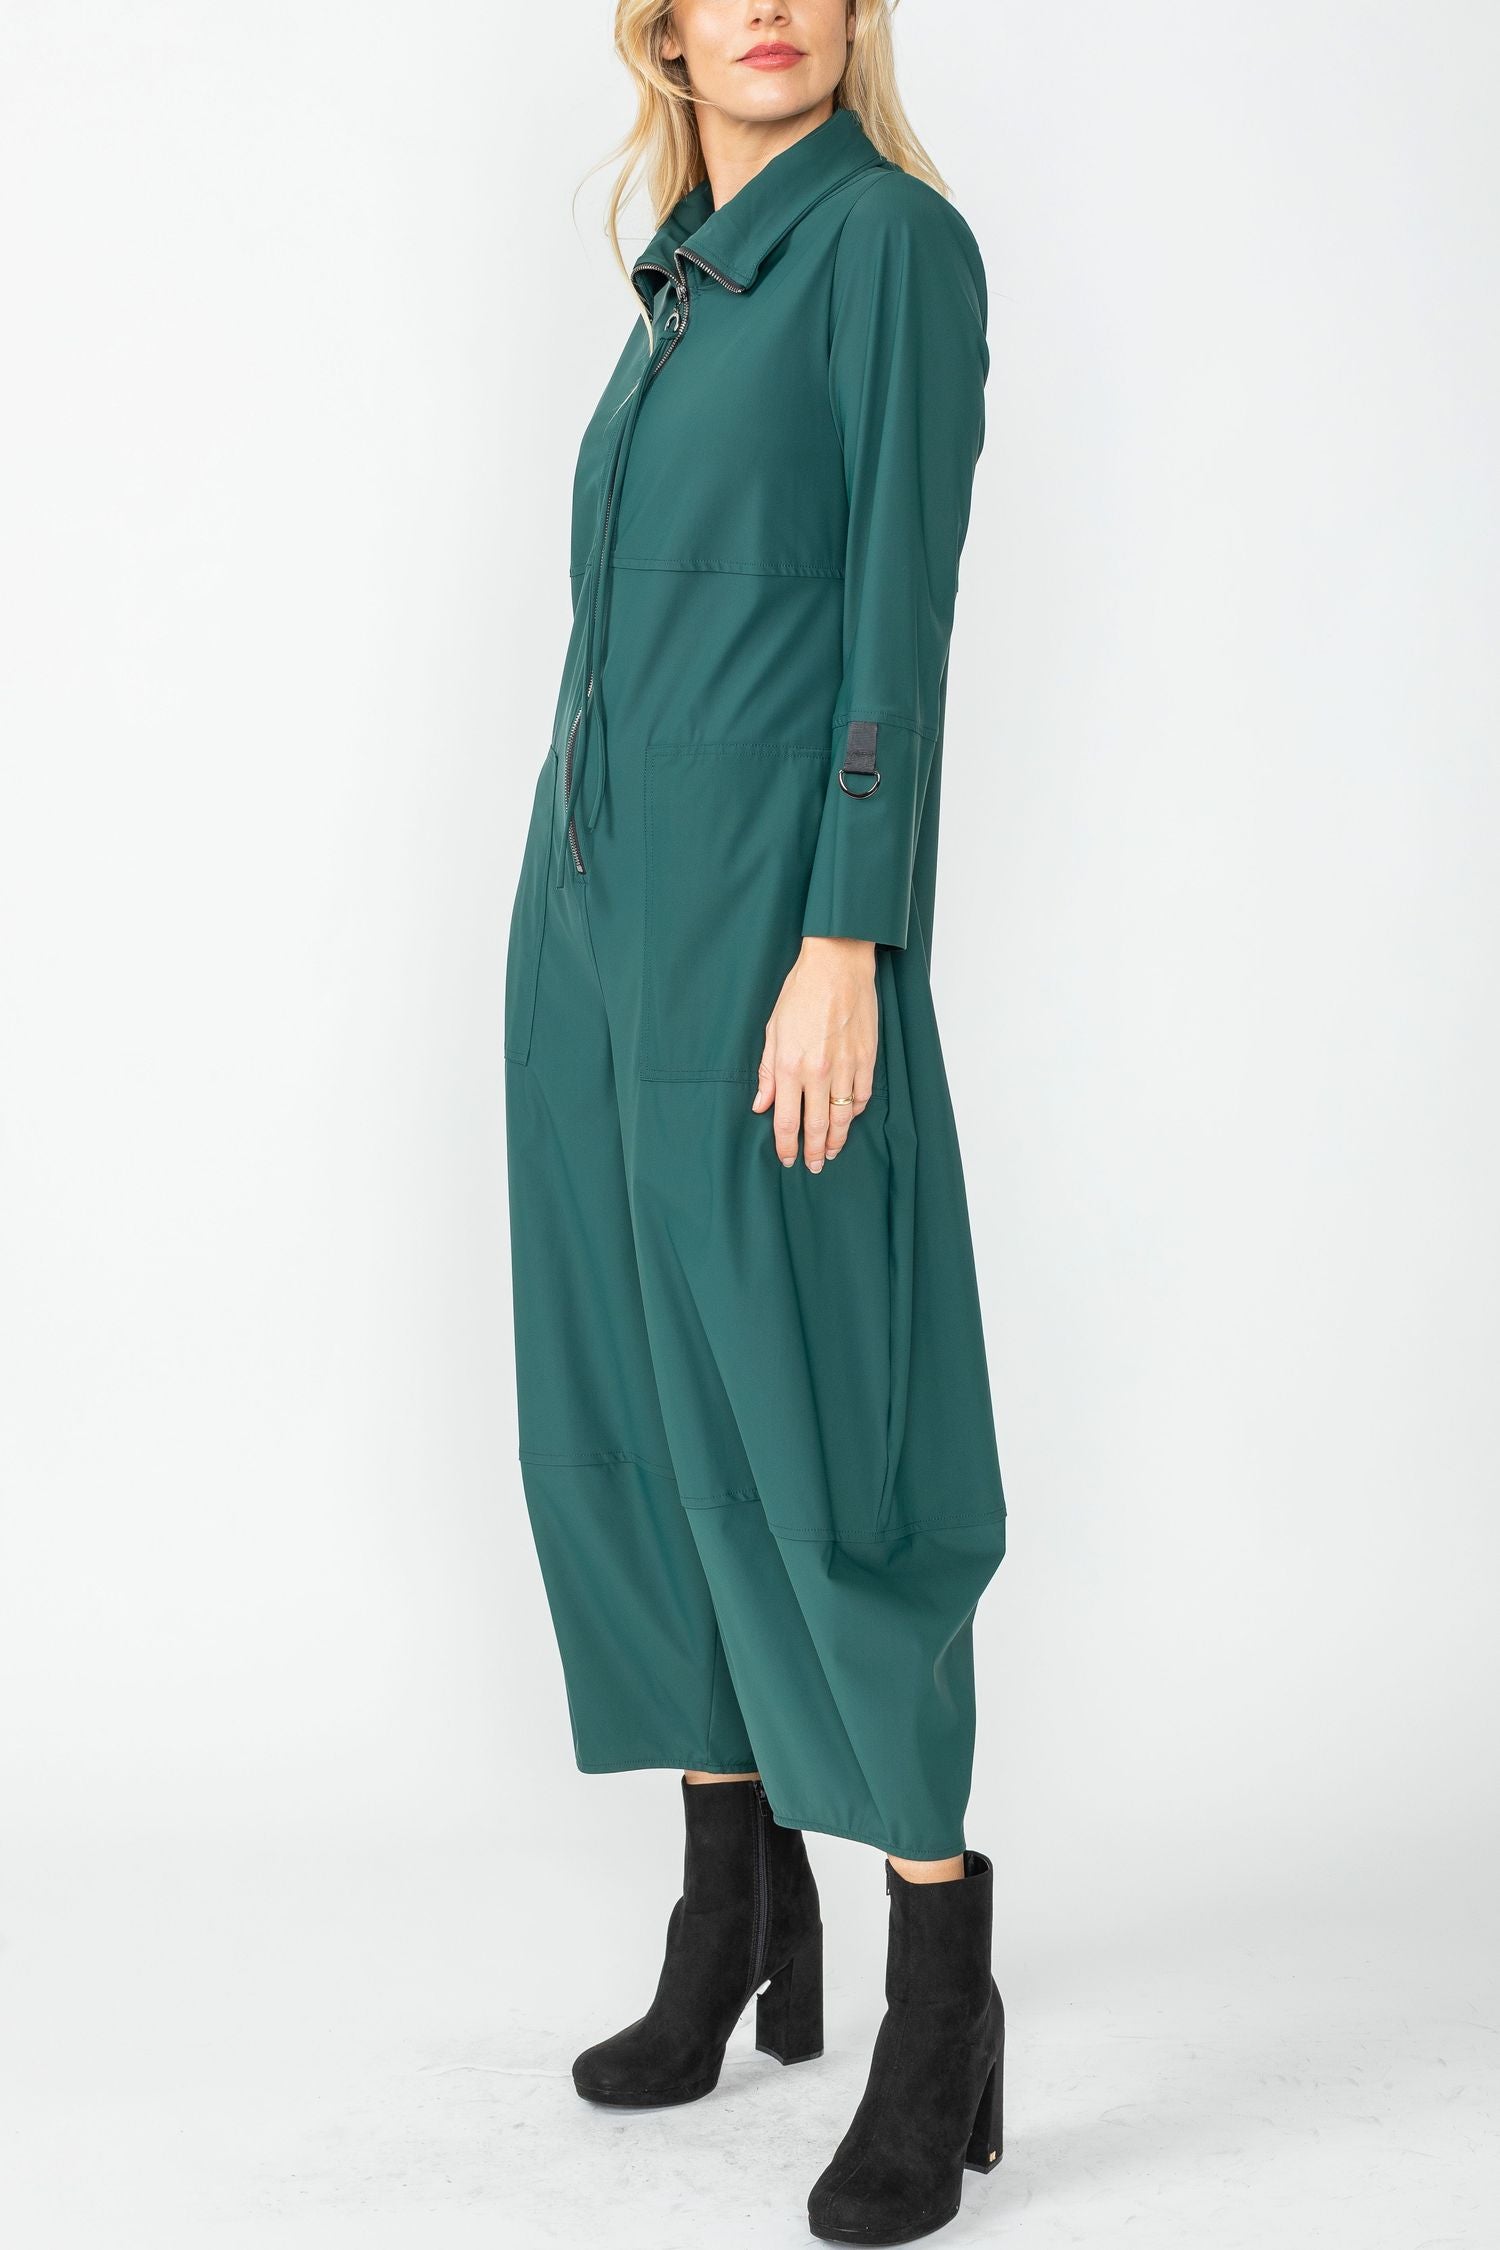 Hunter Green Zip-Up Front Cropped Long Sleeve Jumpsuit